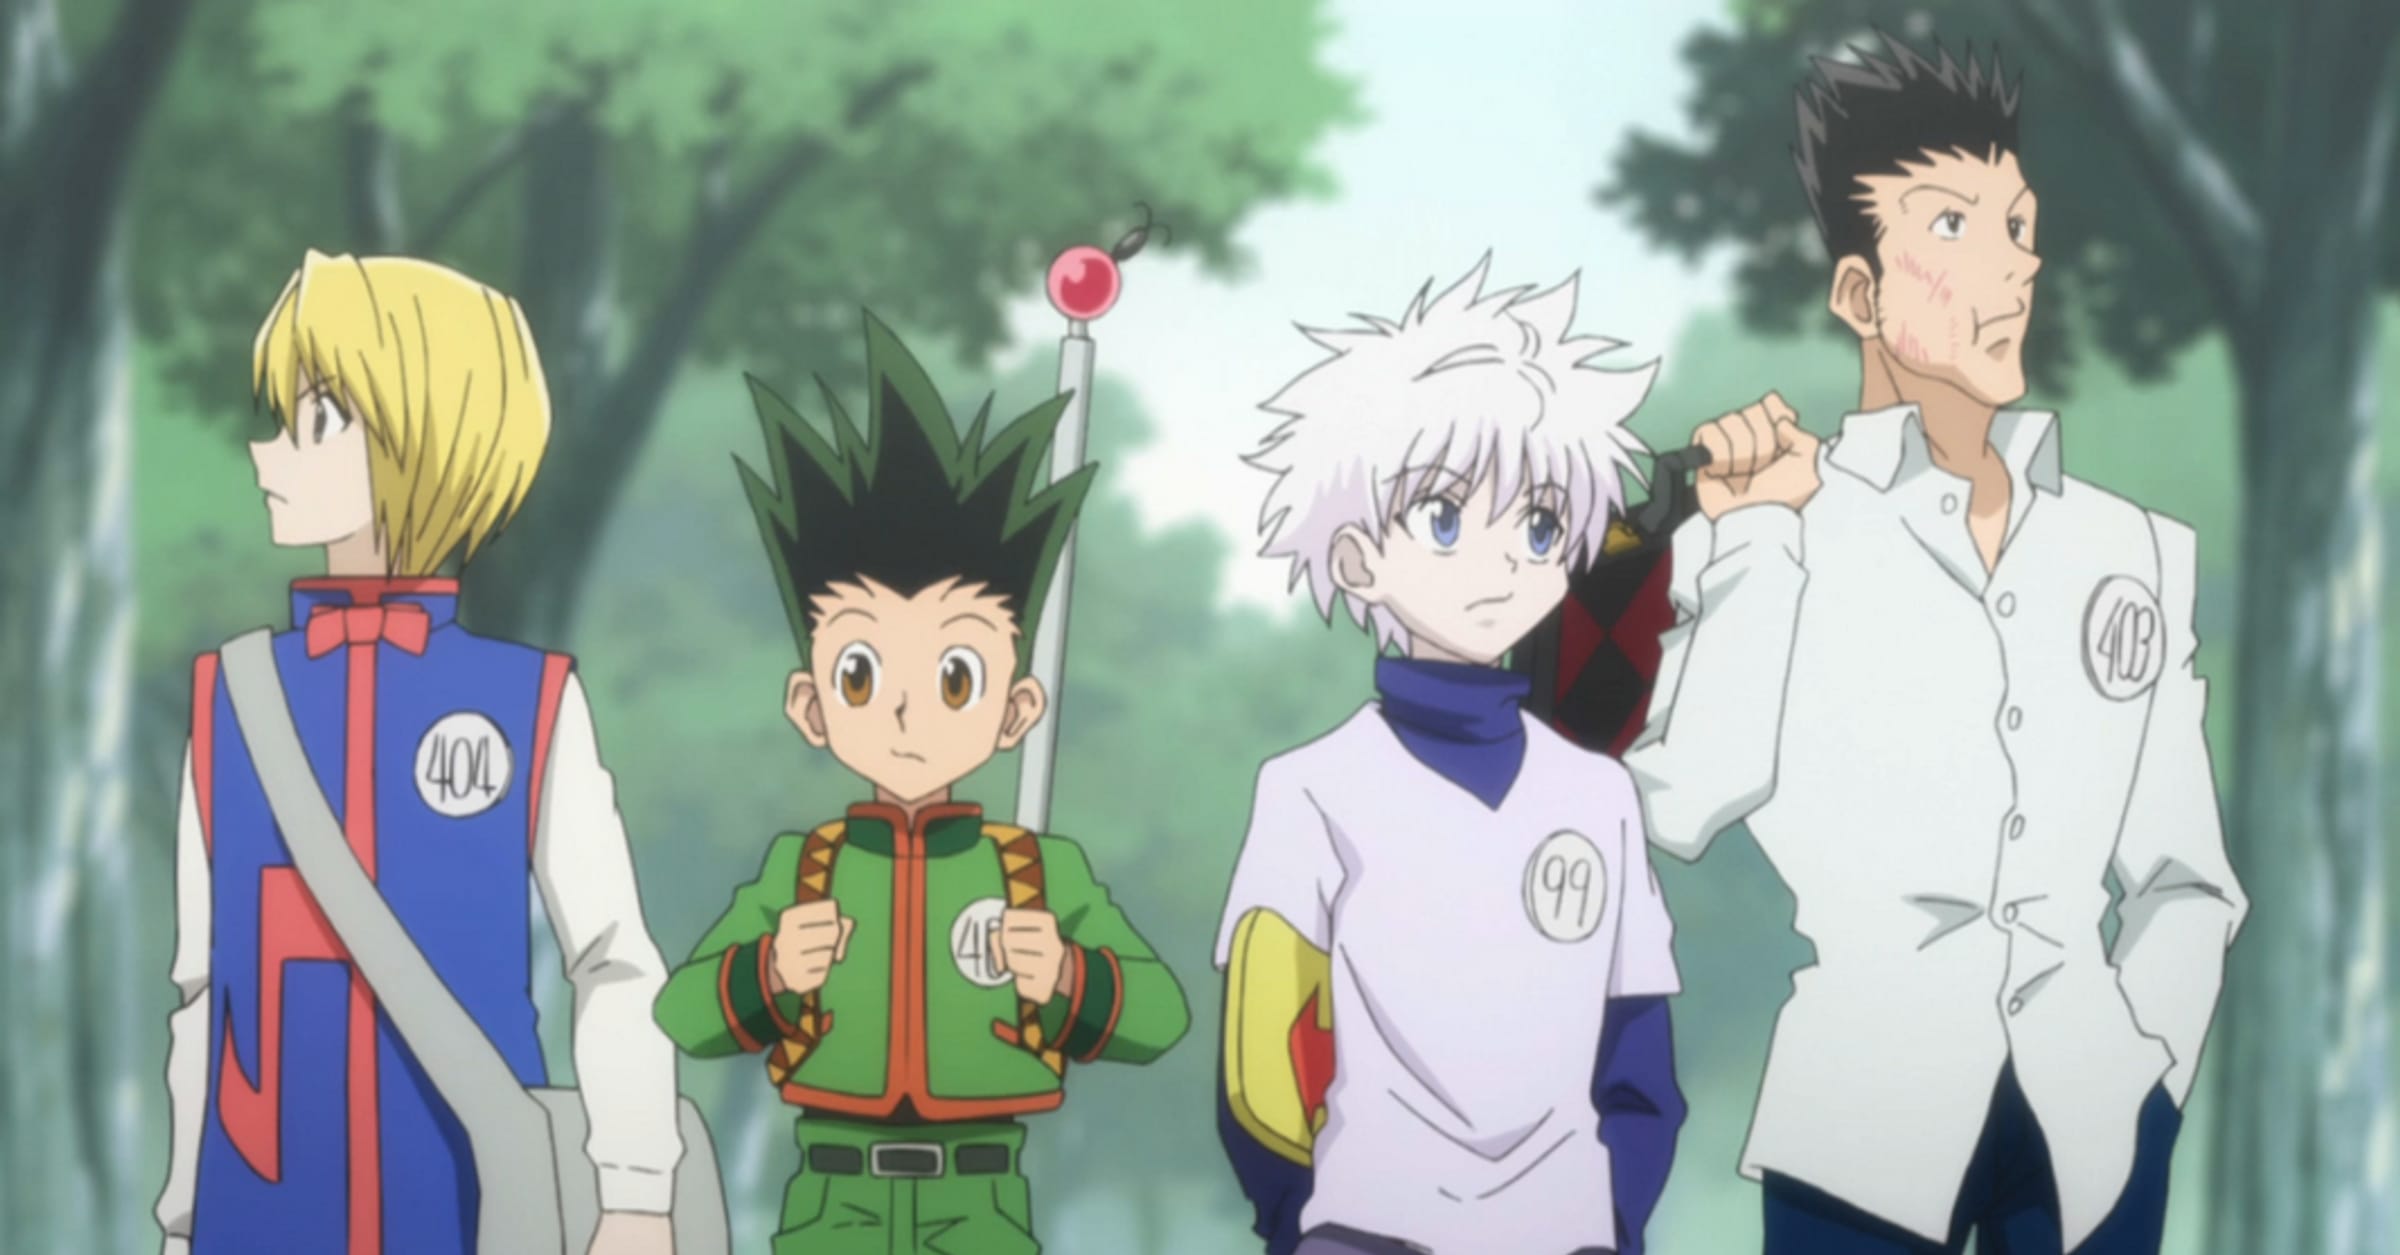 Was Naruto inspired by Hunter x Hunter? The answer to the burning question